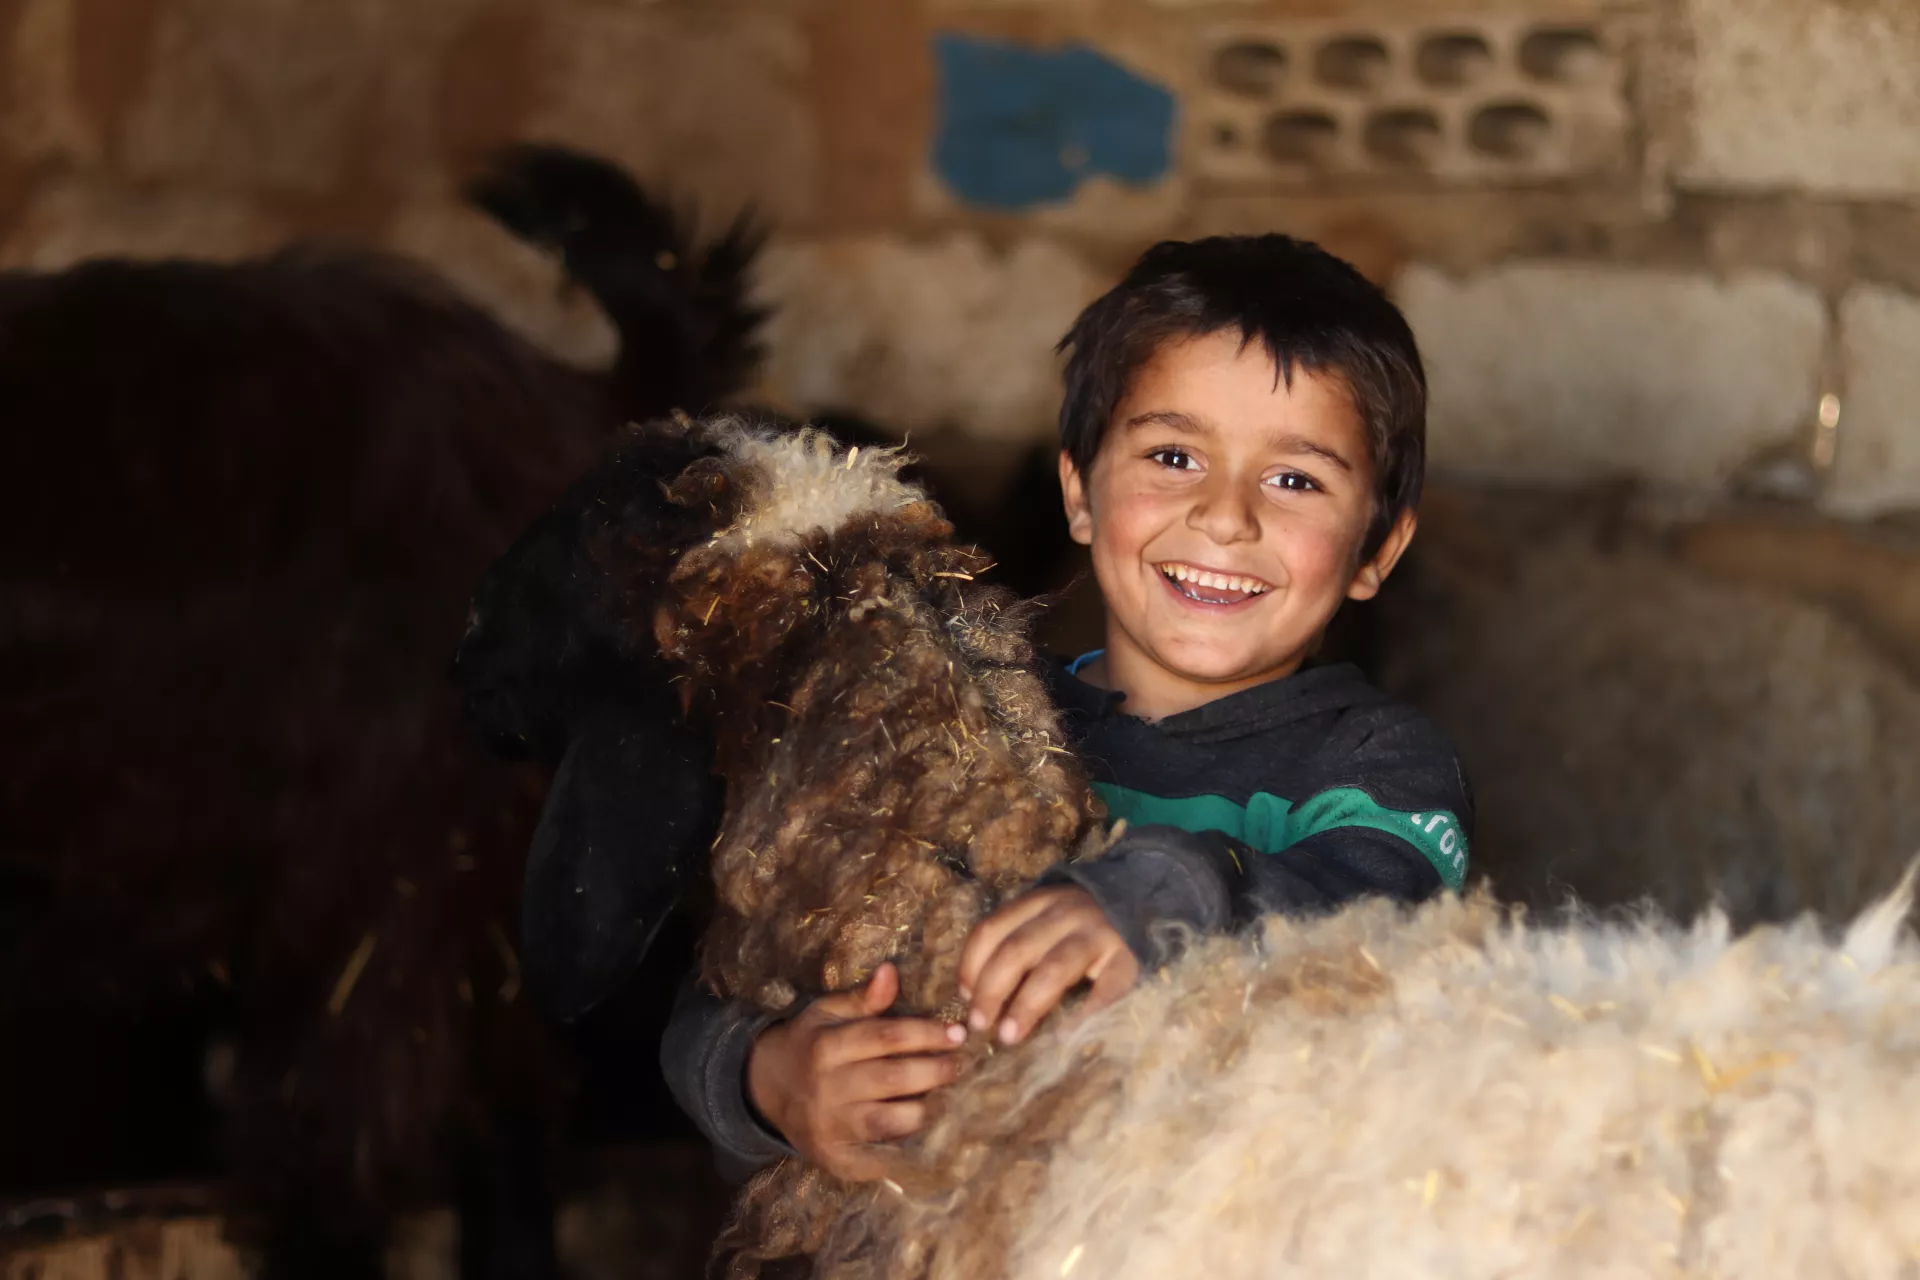 A young boy is hugging a sheep in a barn